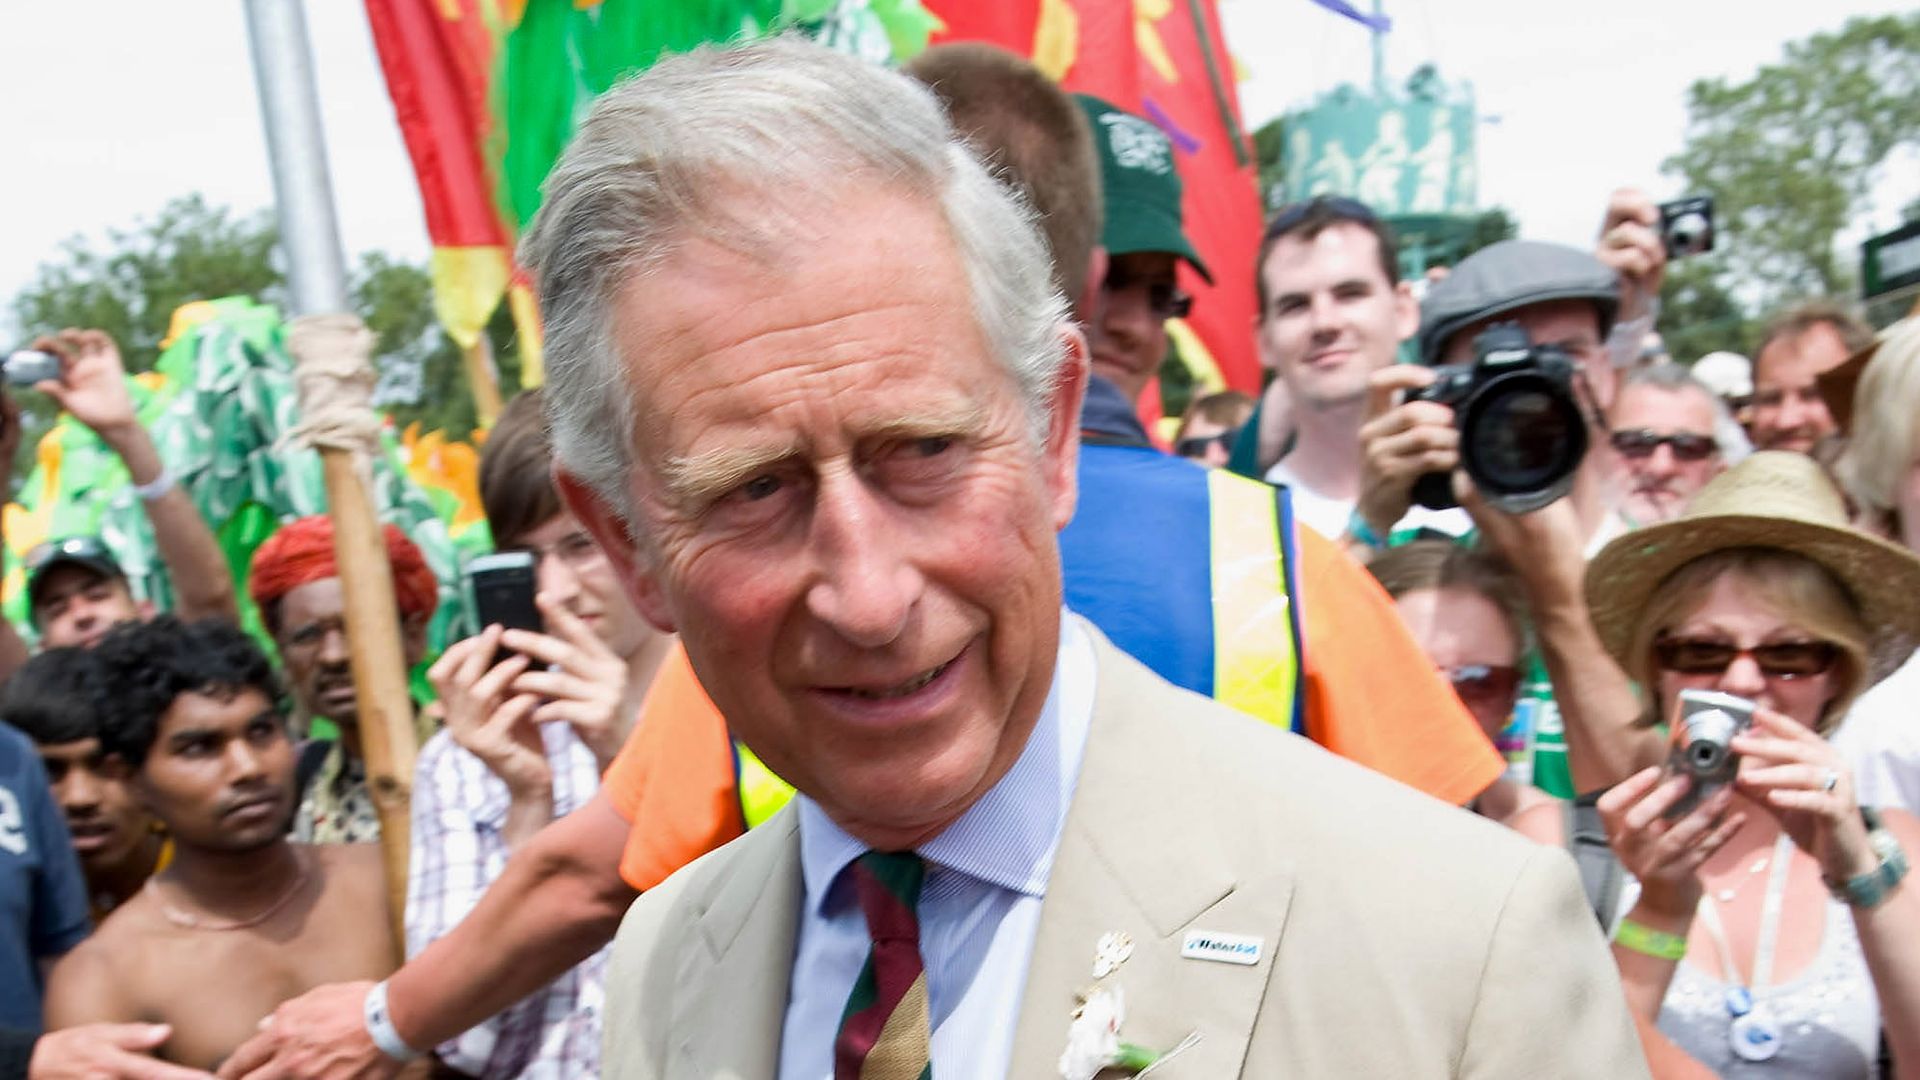 Prince Charles, Prince of Wales visits Water Aid during day one of the Glastonbury Festival at Worthy Farm, Pilton on June 24, 2010 in Glastonbury, England.  (Photo by Ian Gavan/Getty Images)